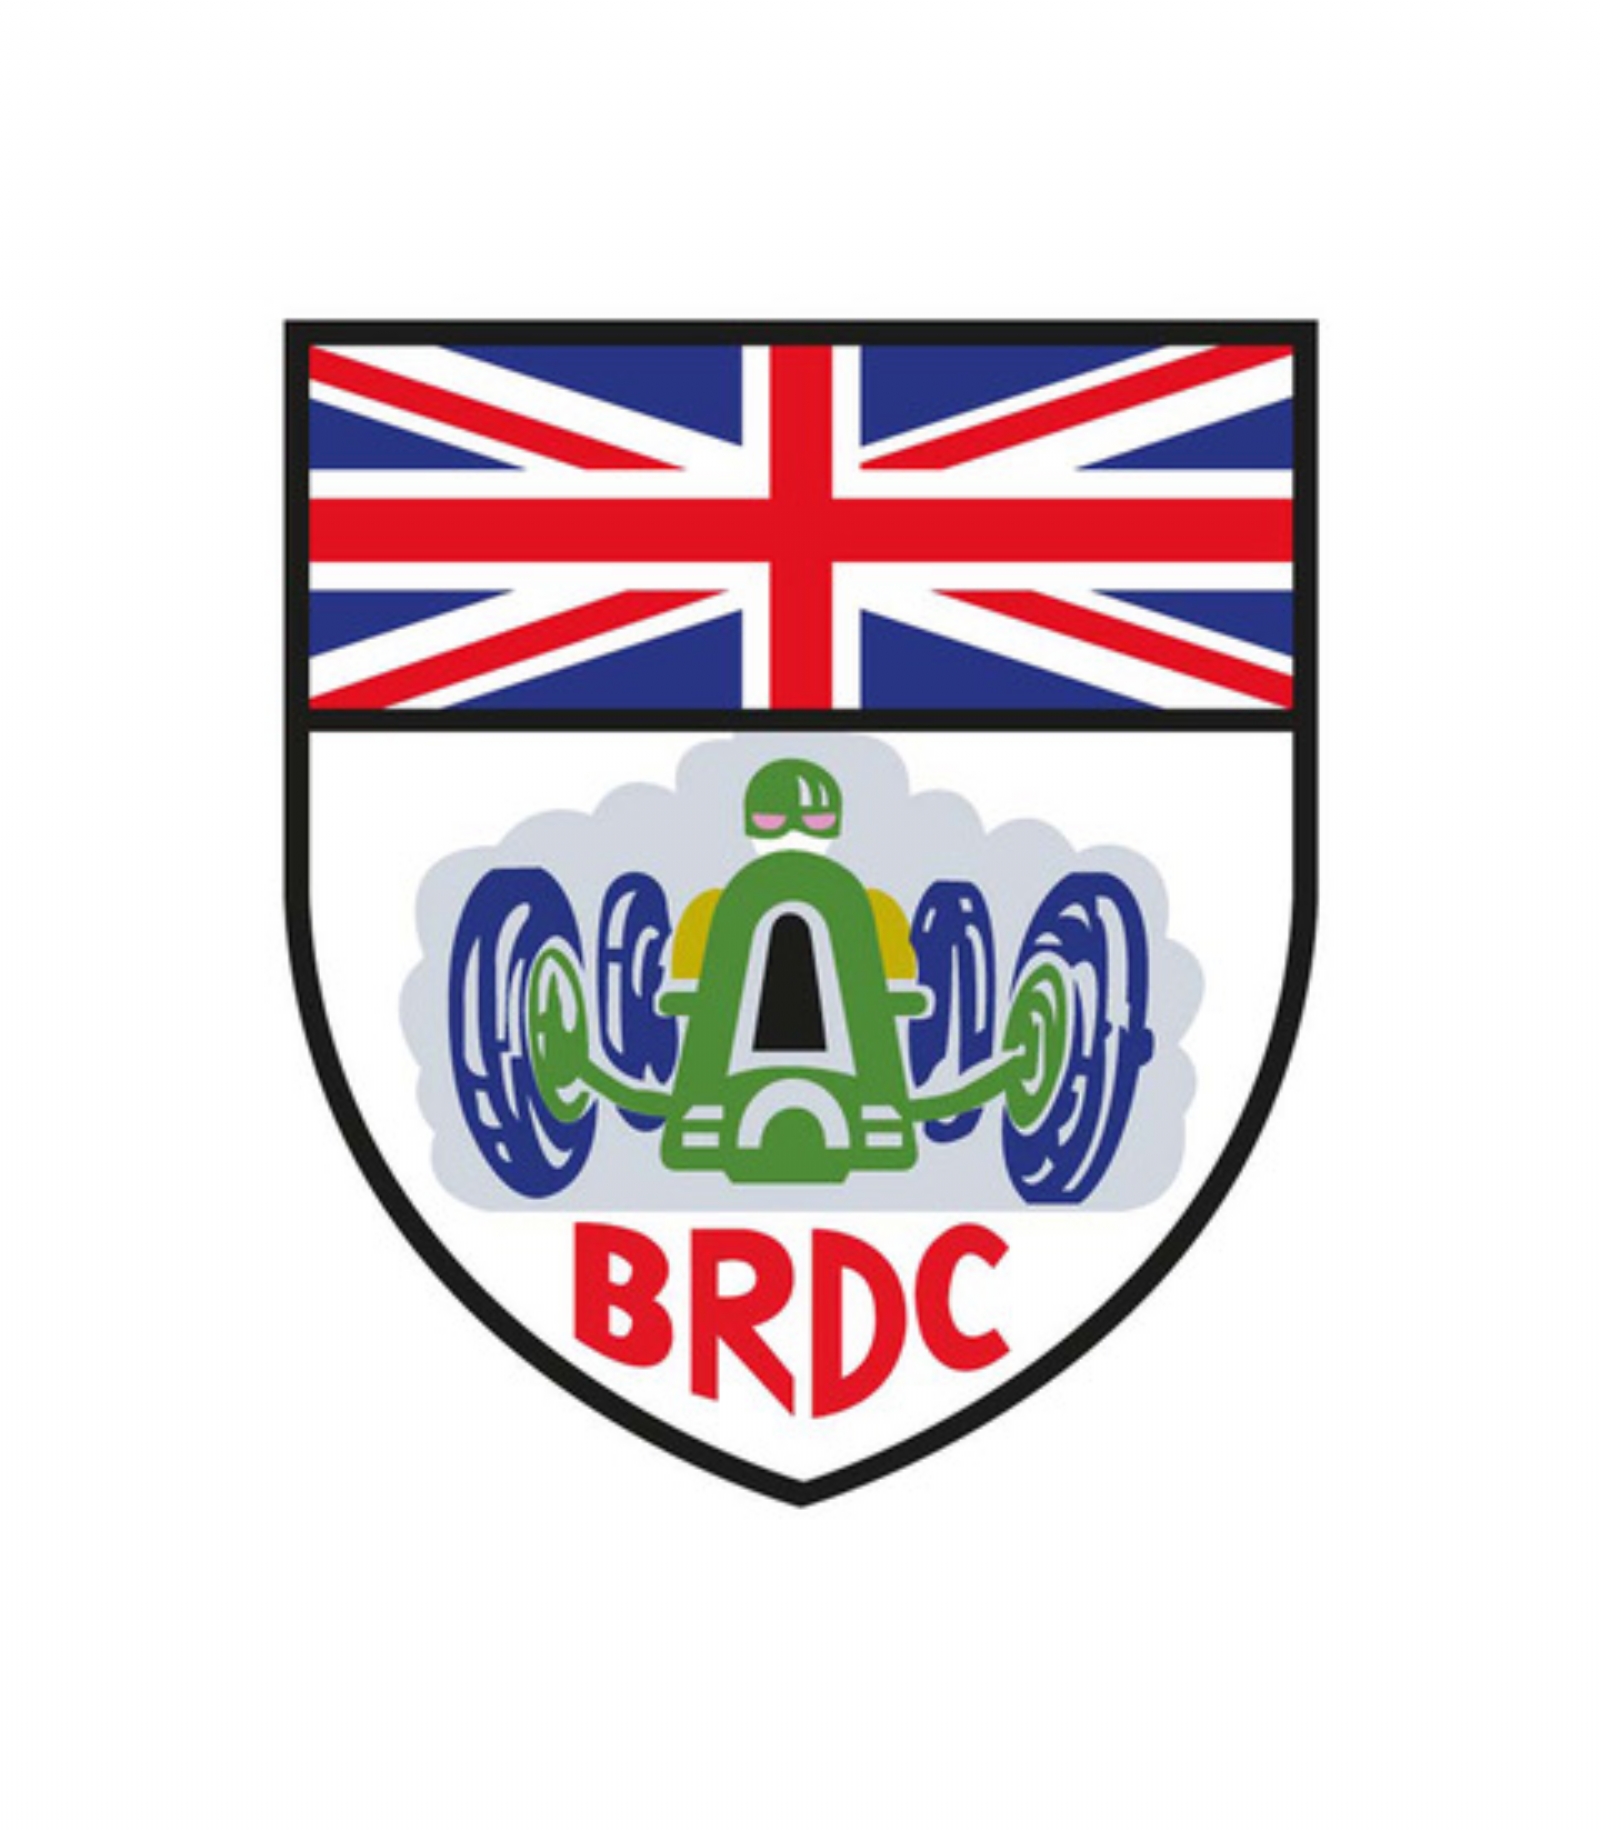 Tom Canning announced as a full member of the BRDC